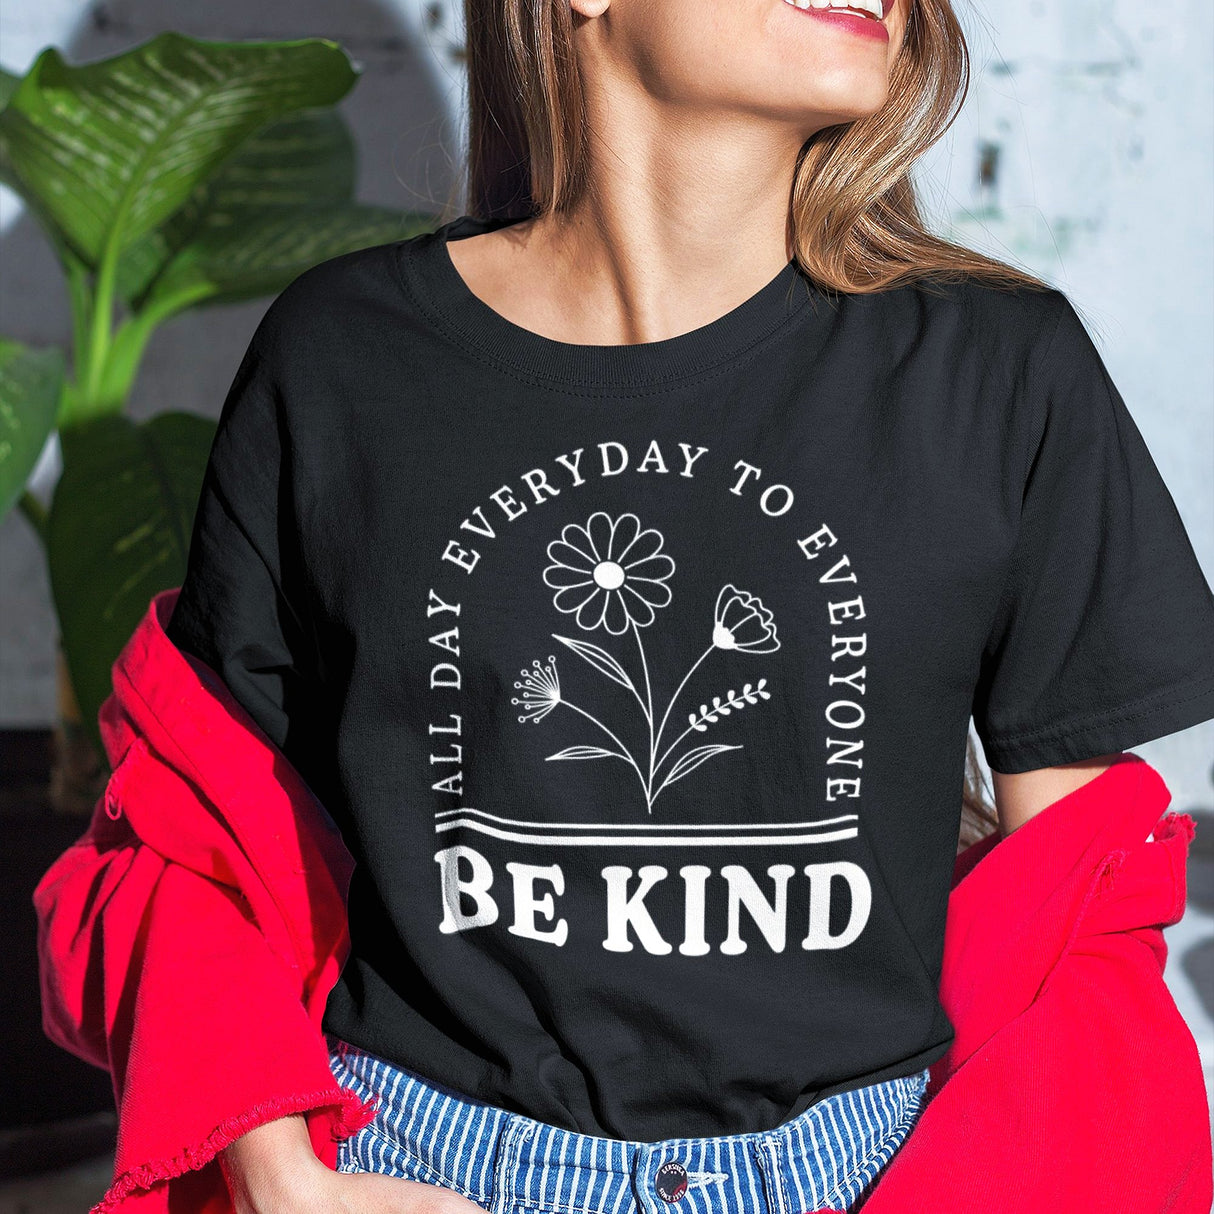 be-kind-all-day-everyday-to-everyone-inspirational-tee-life-t-shirt-inspirational-tee-kind-t-shirt-positivity-tee#color_black